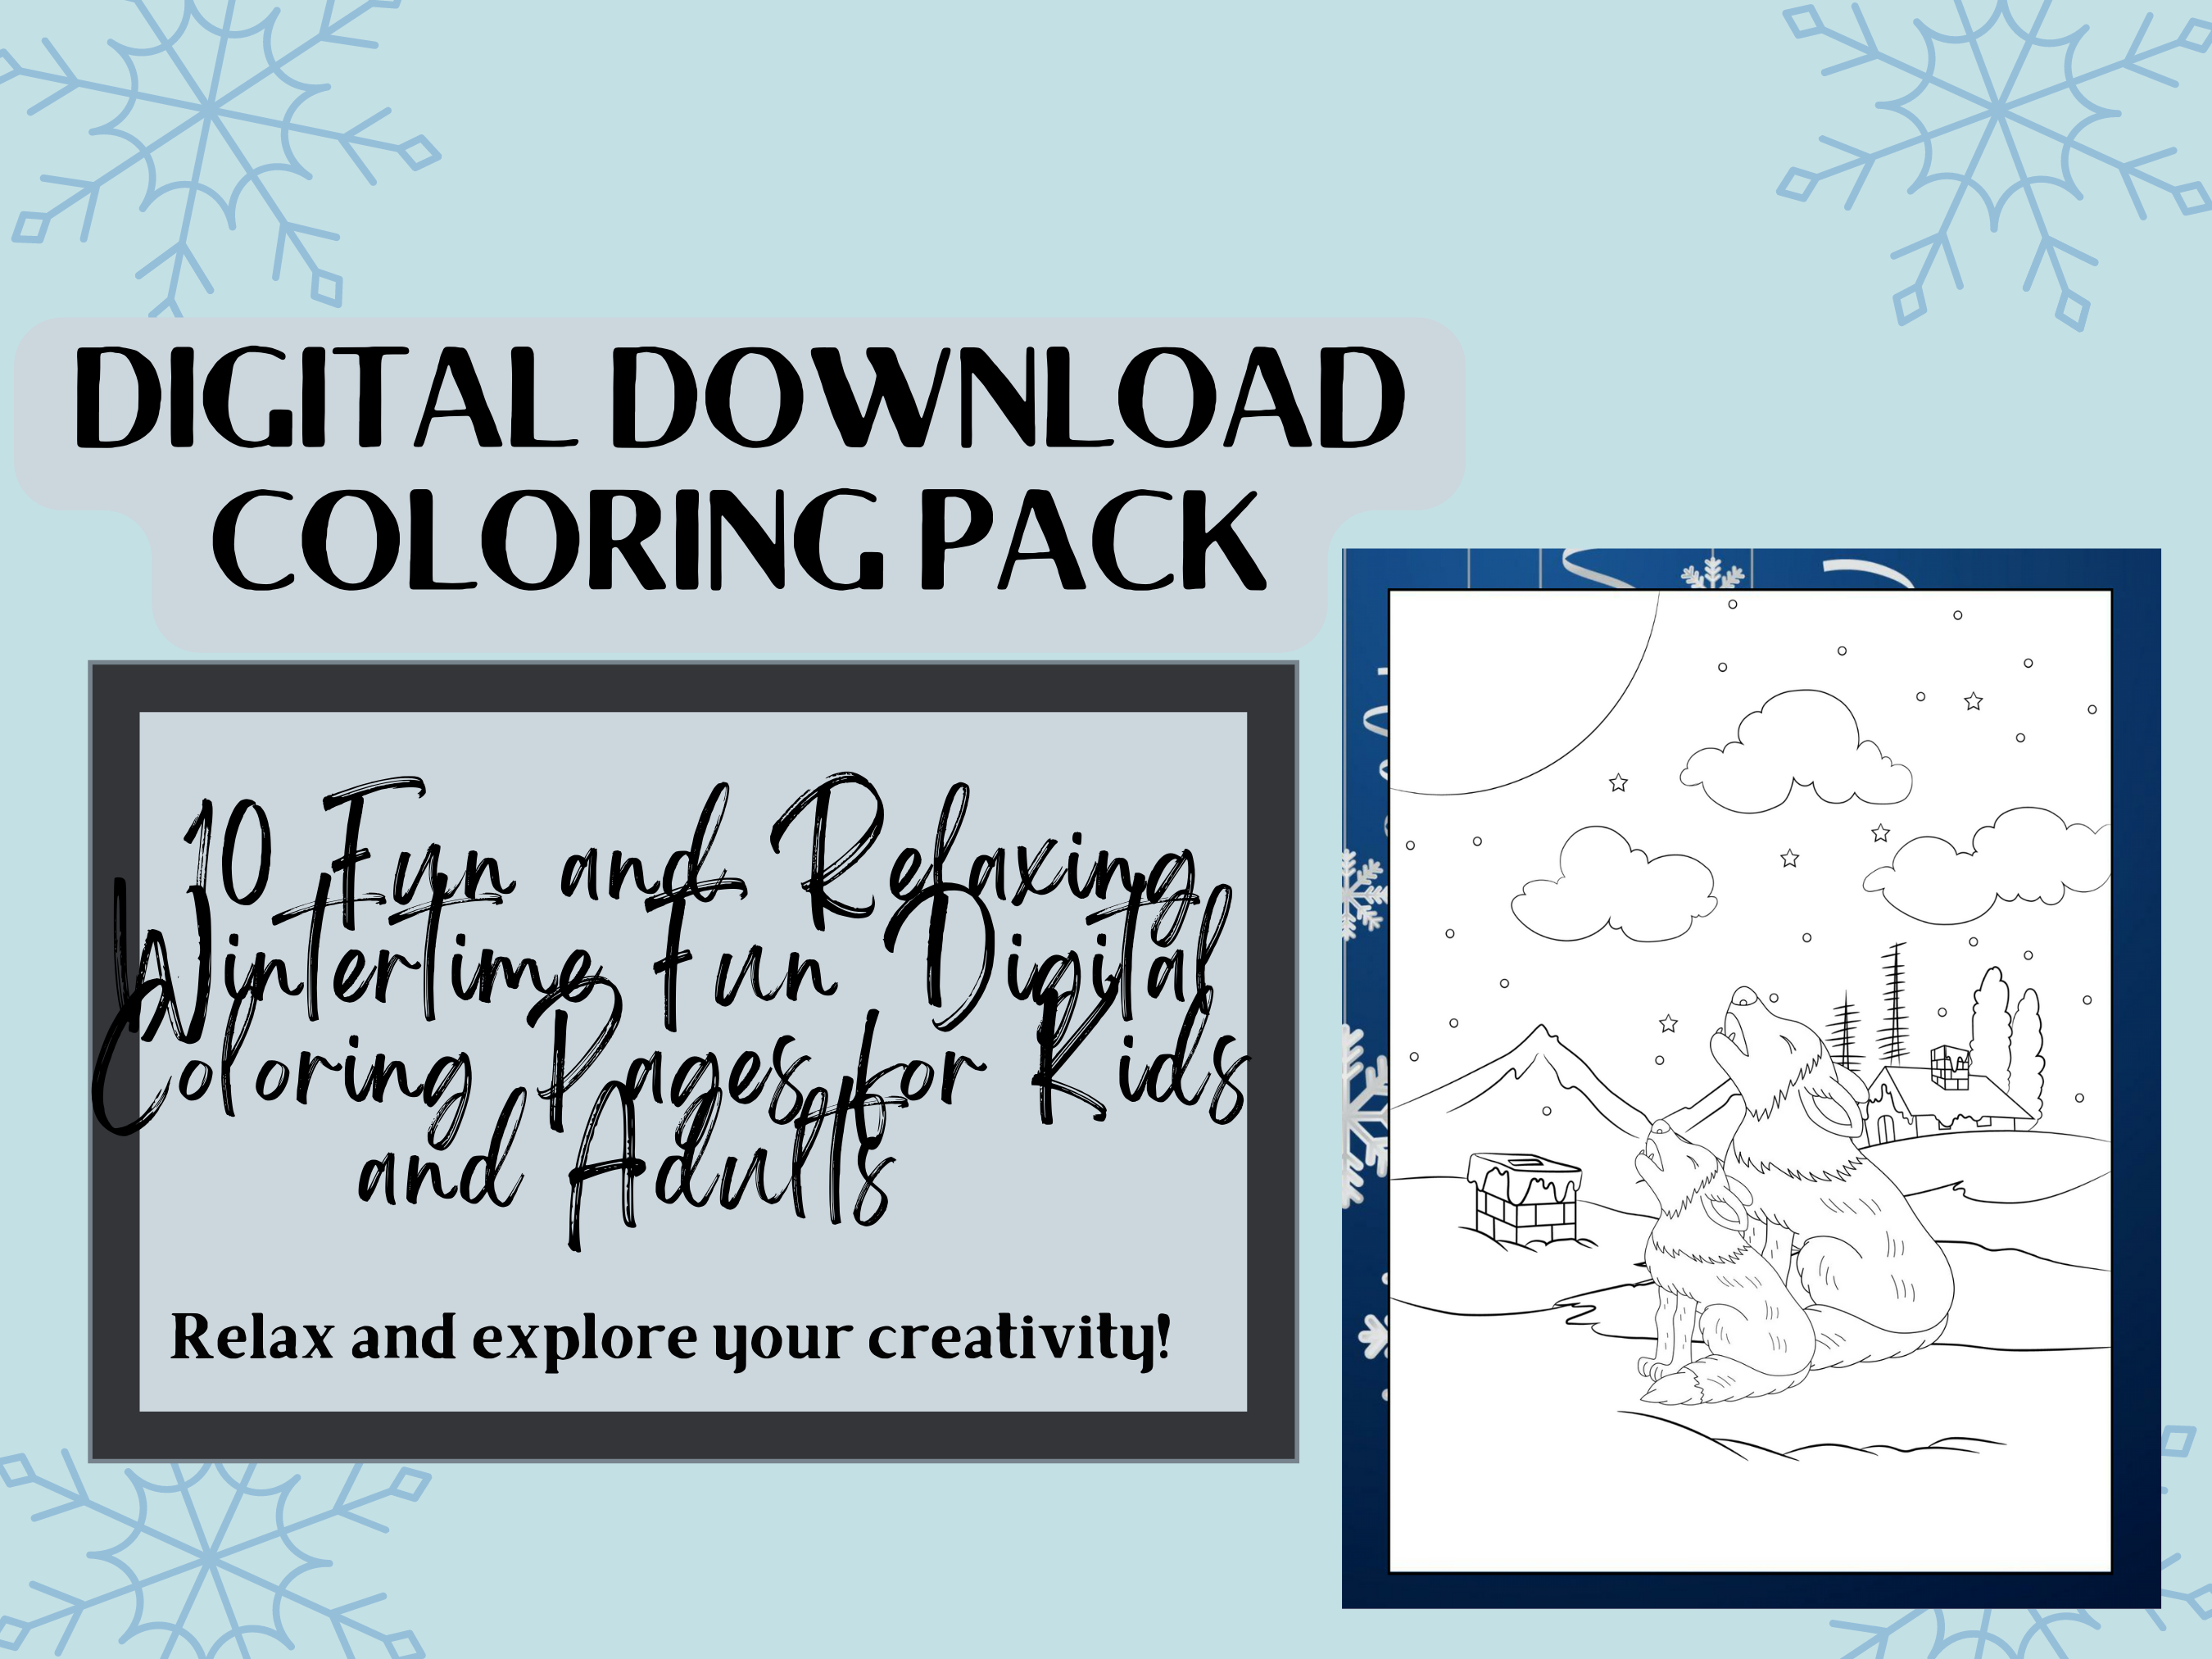 No category fun and relaxing wintertime fun digital coloring pages for kids and adults